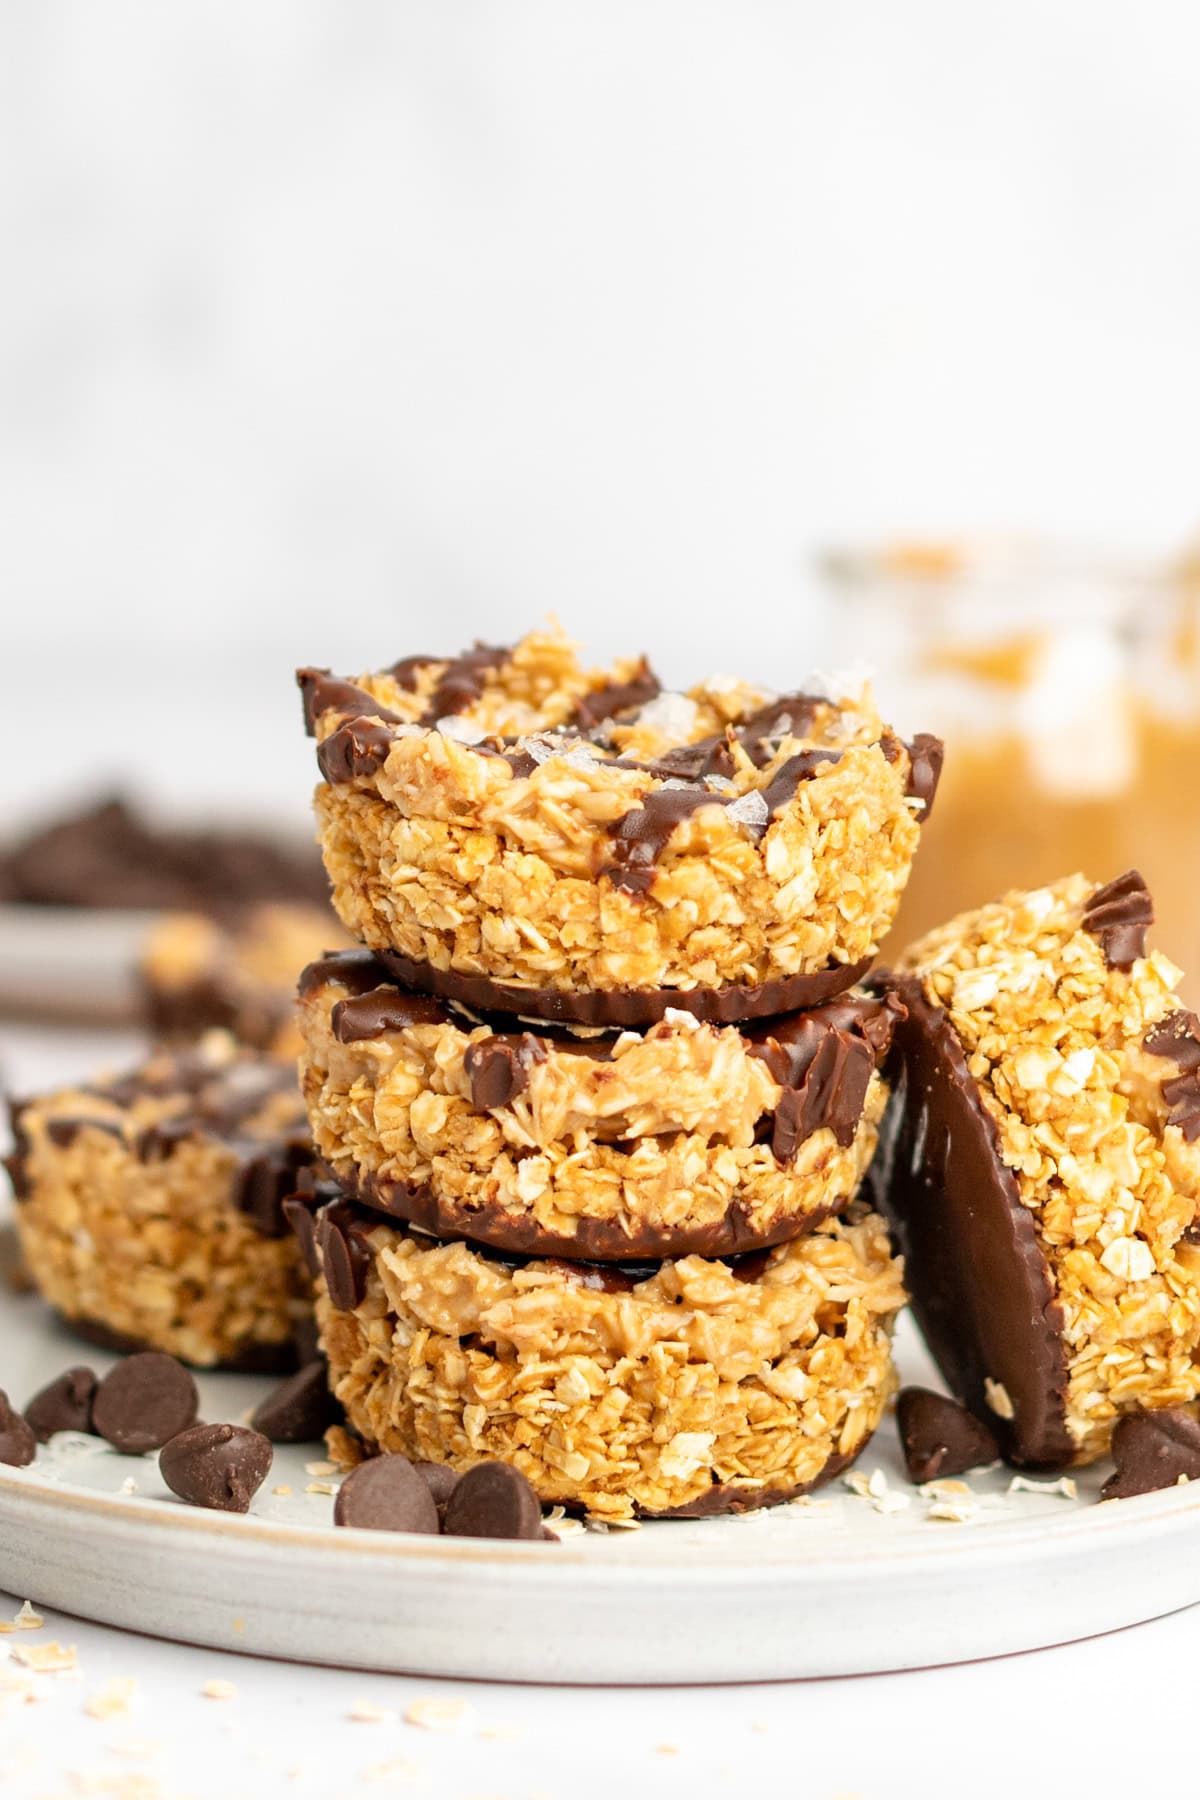 A stack of four oat and chocolate dessert bars on a plate with chocolate chips scattered around. A jar with peanut butter is visible in the background.